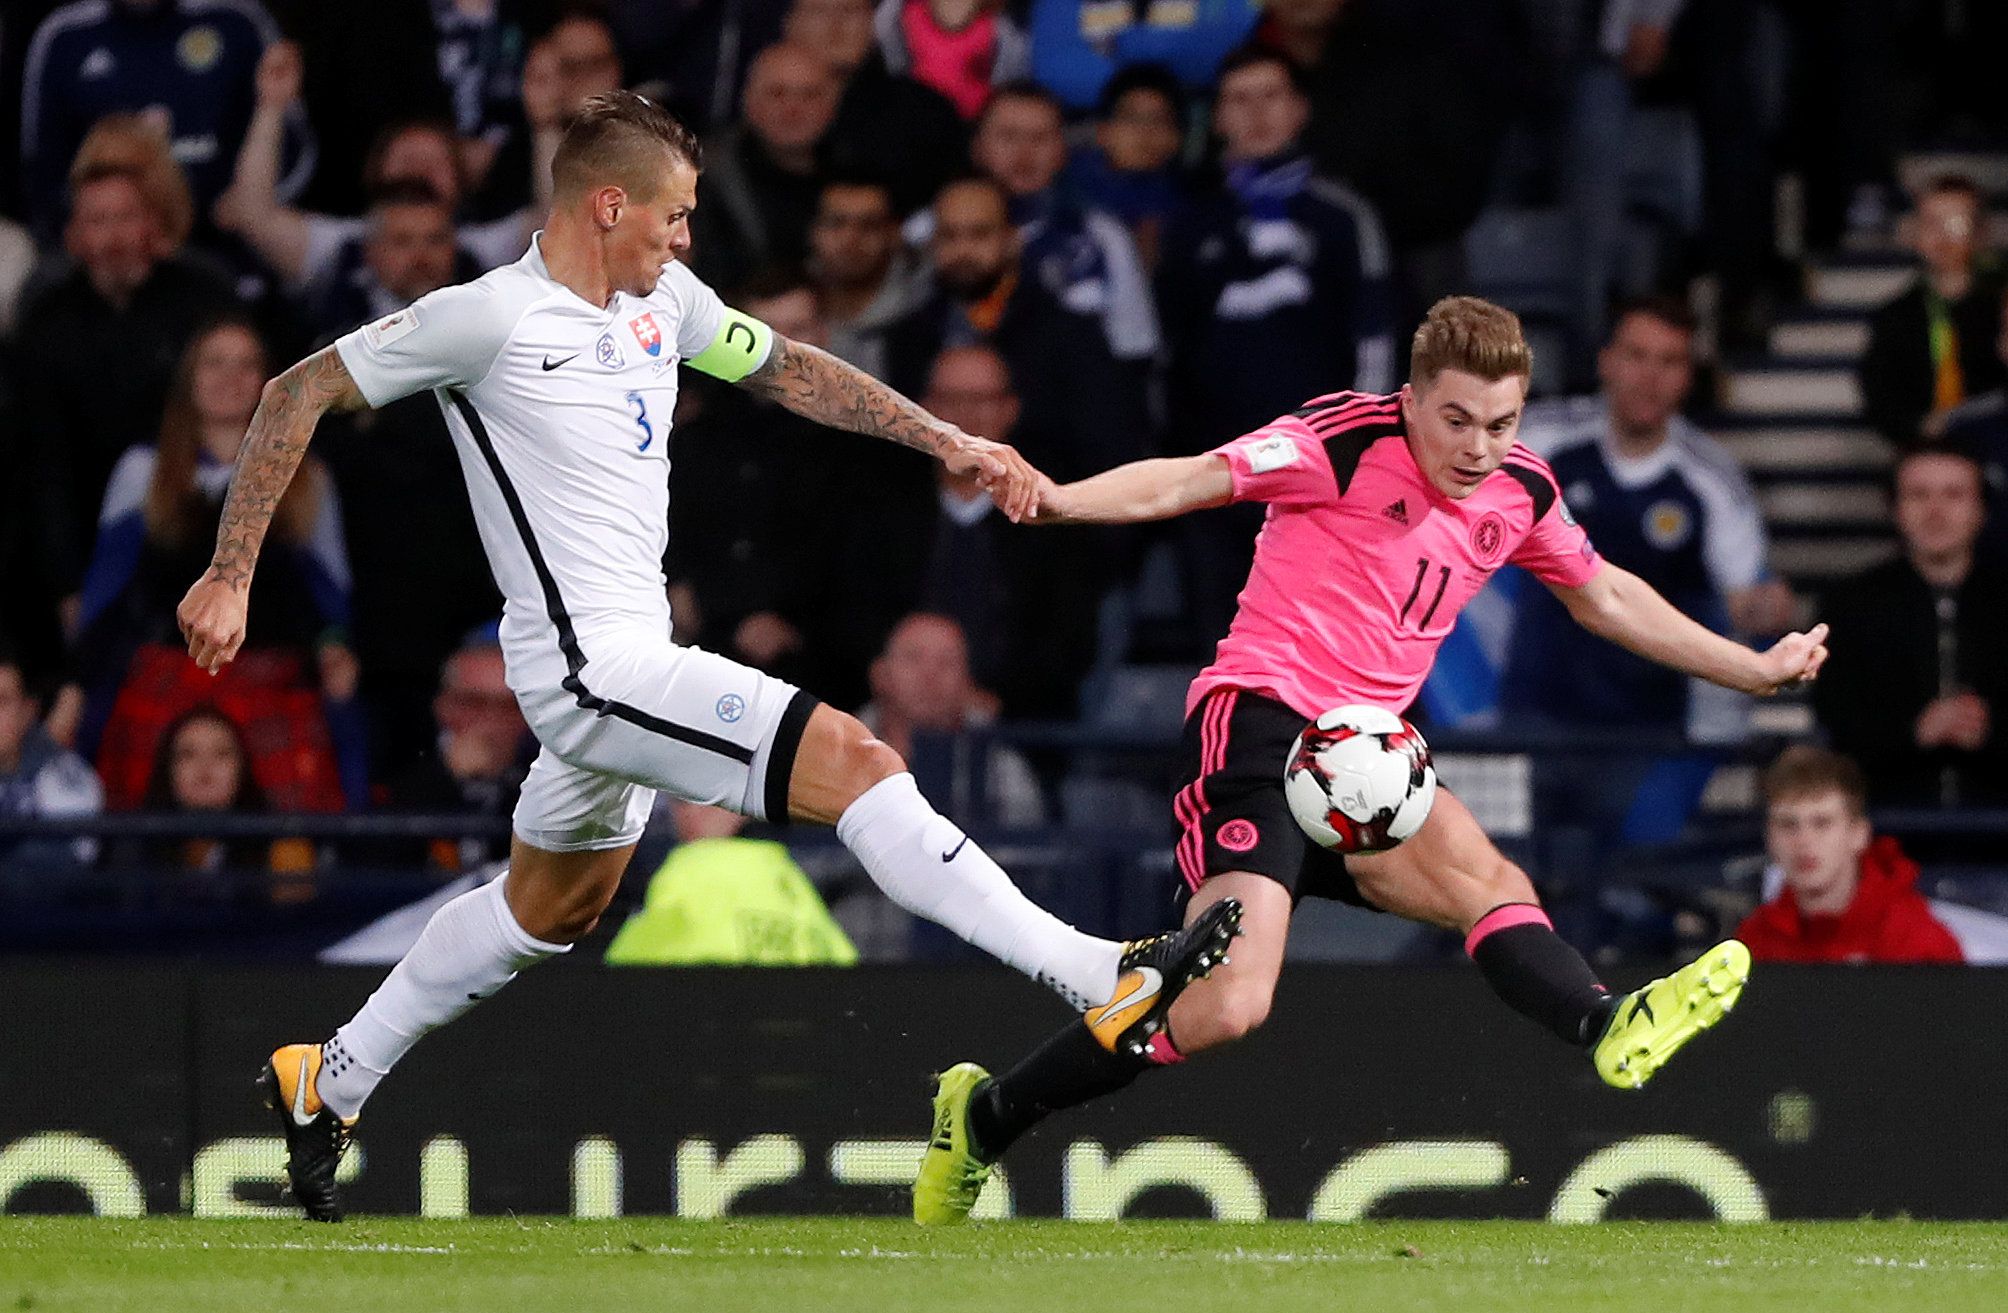 Soccer Football - 2018 World Cup Qualifications - Europe - Scotland vs Slovakia - Hampden Park, Glasgow, Britain - October 5, 2017  Slovakia’s Martin Skrtel  in action with Scotland’s James Forrest    REUTERS/Russell Cheyne